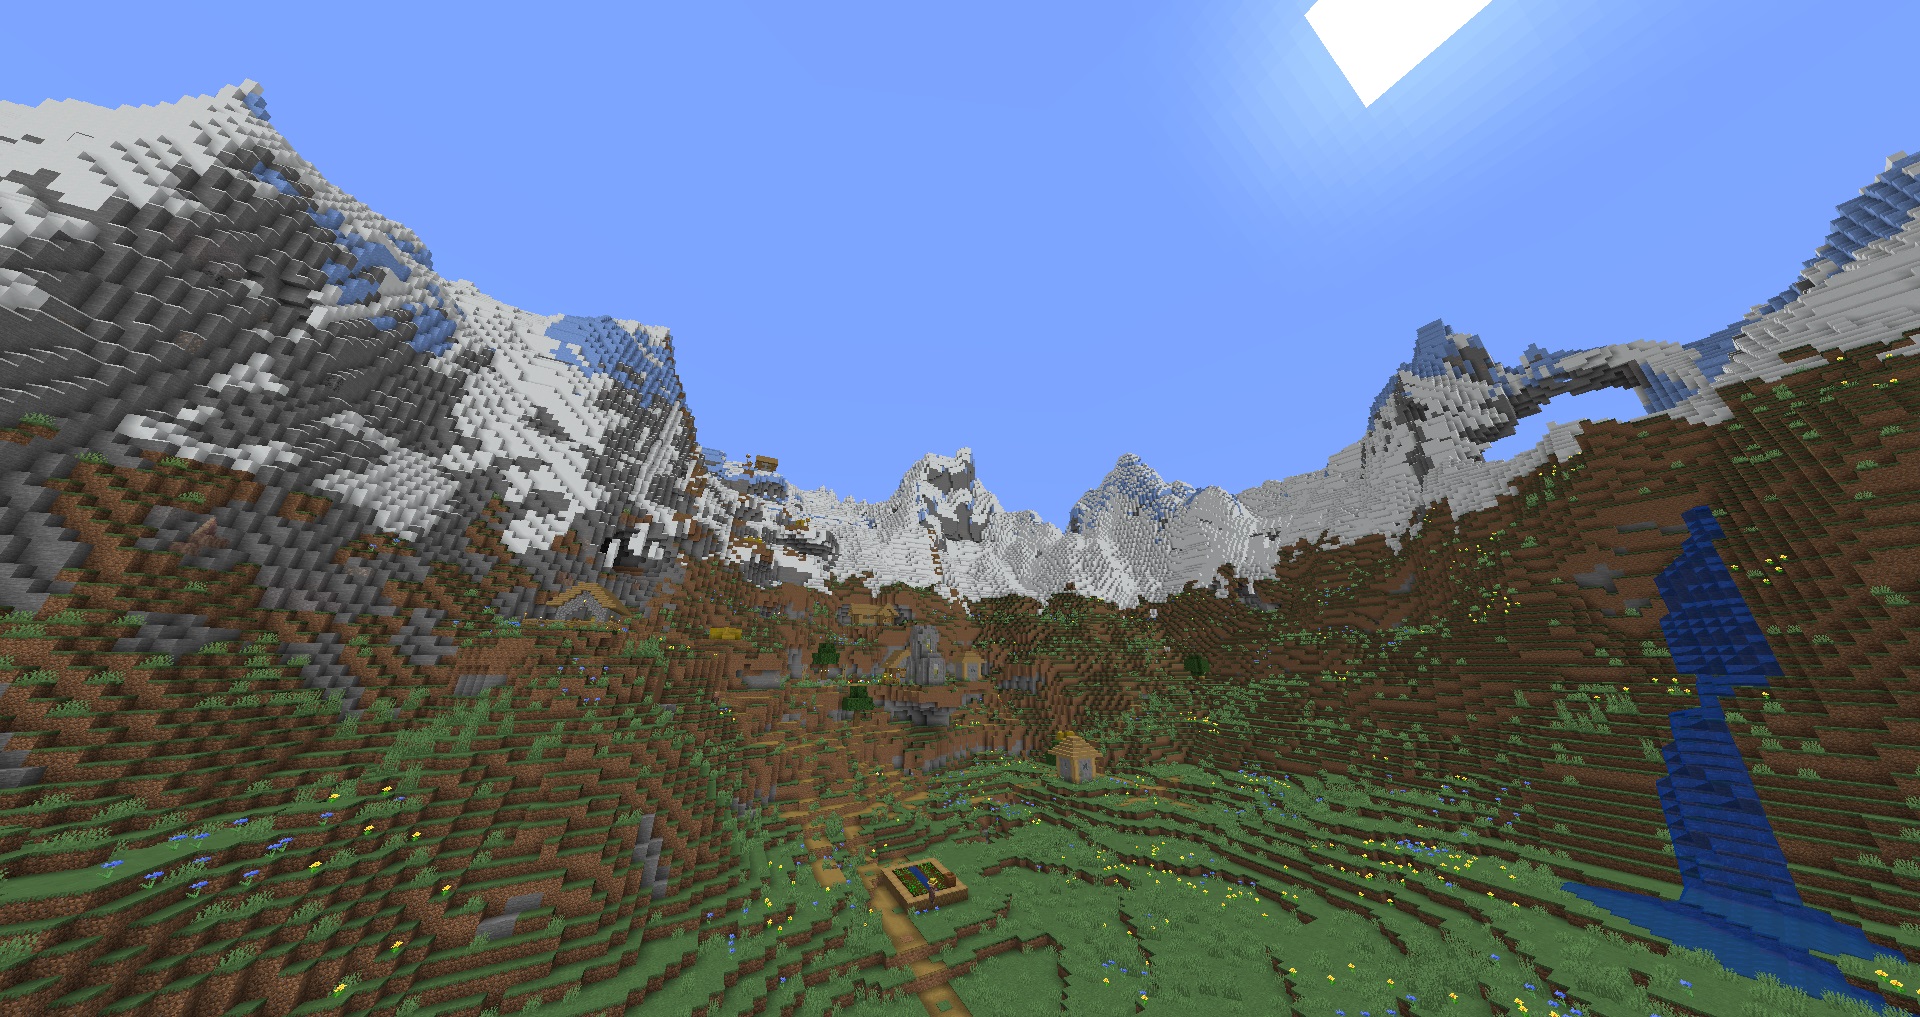 Minecraft - A background of snowy mountains behind a village